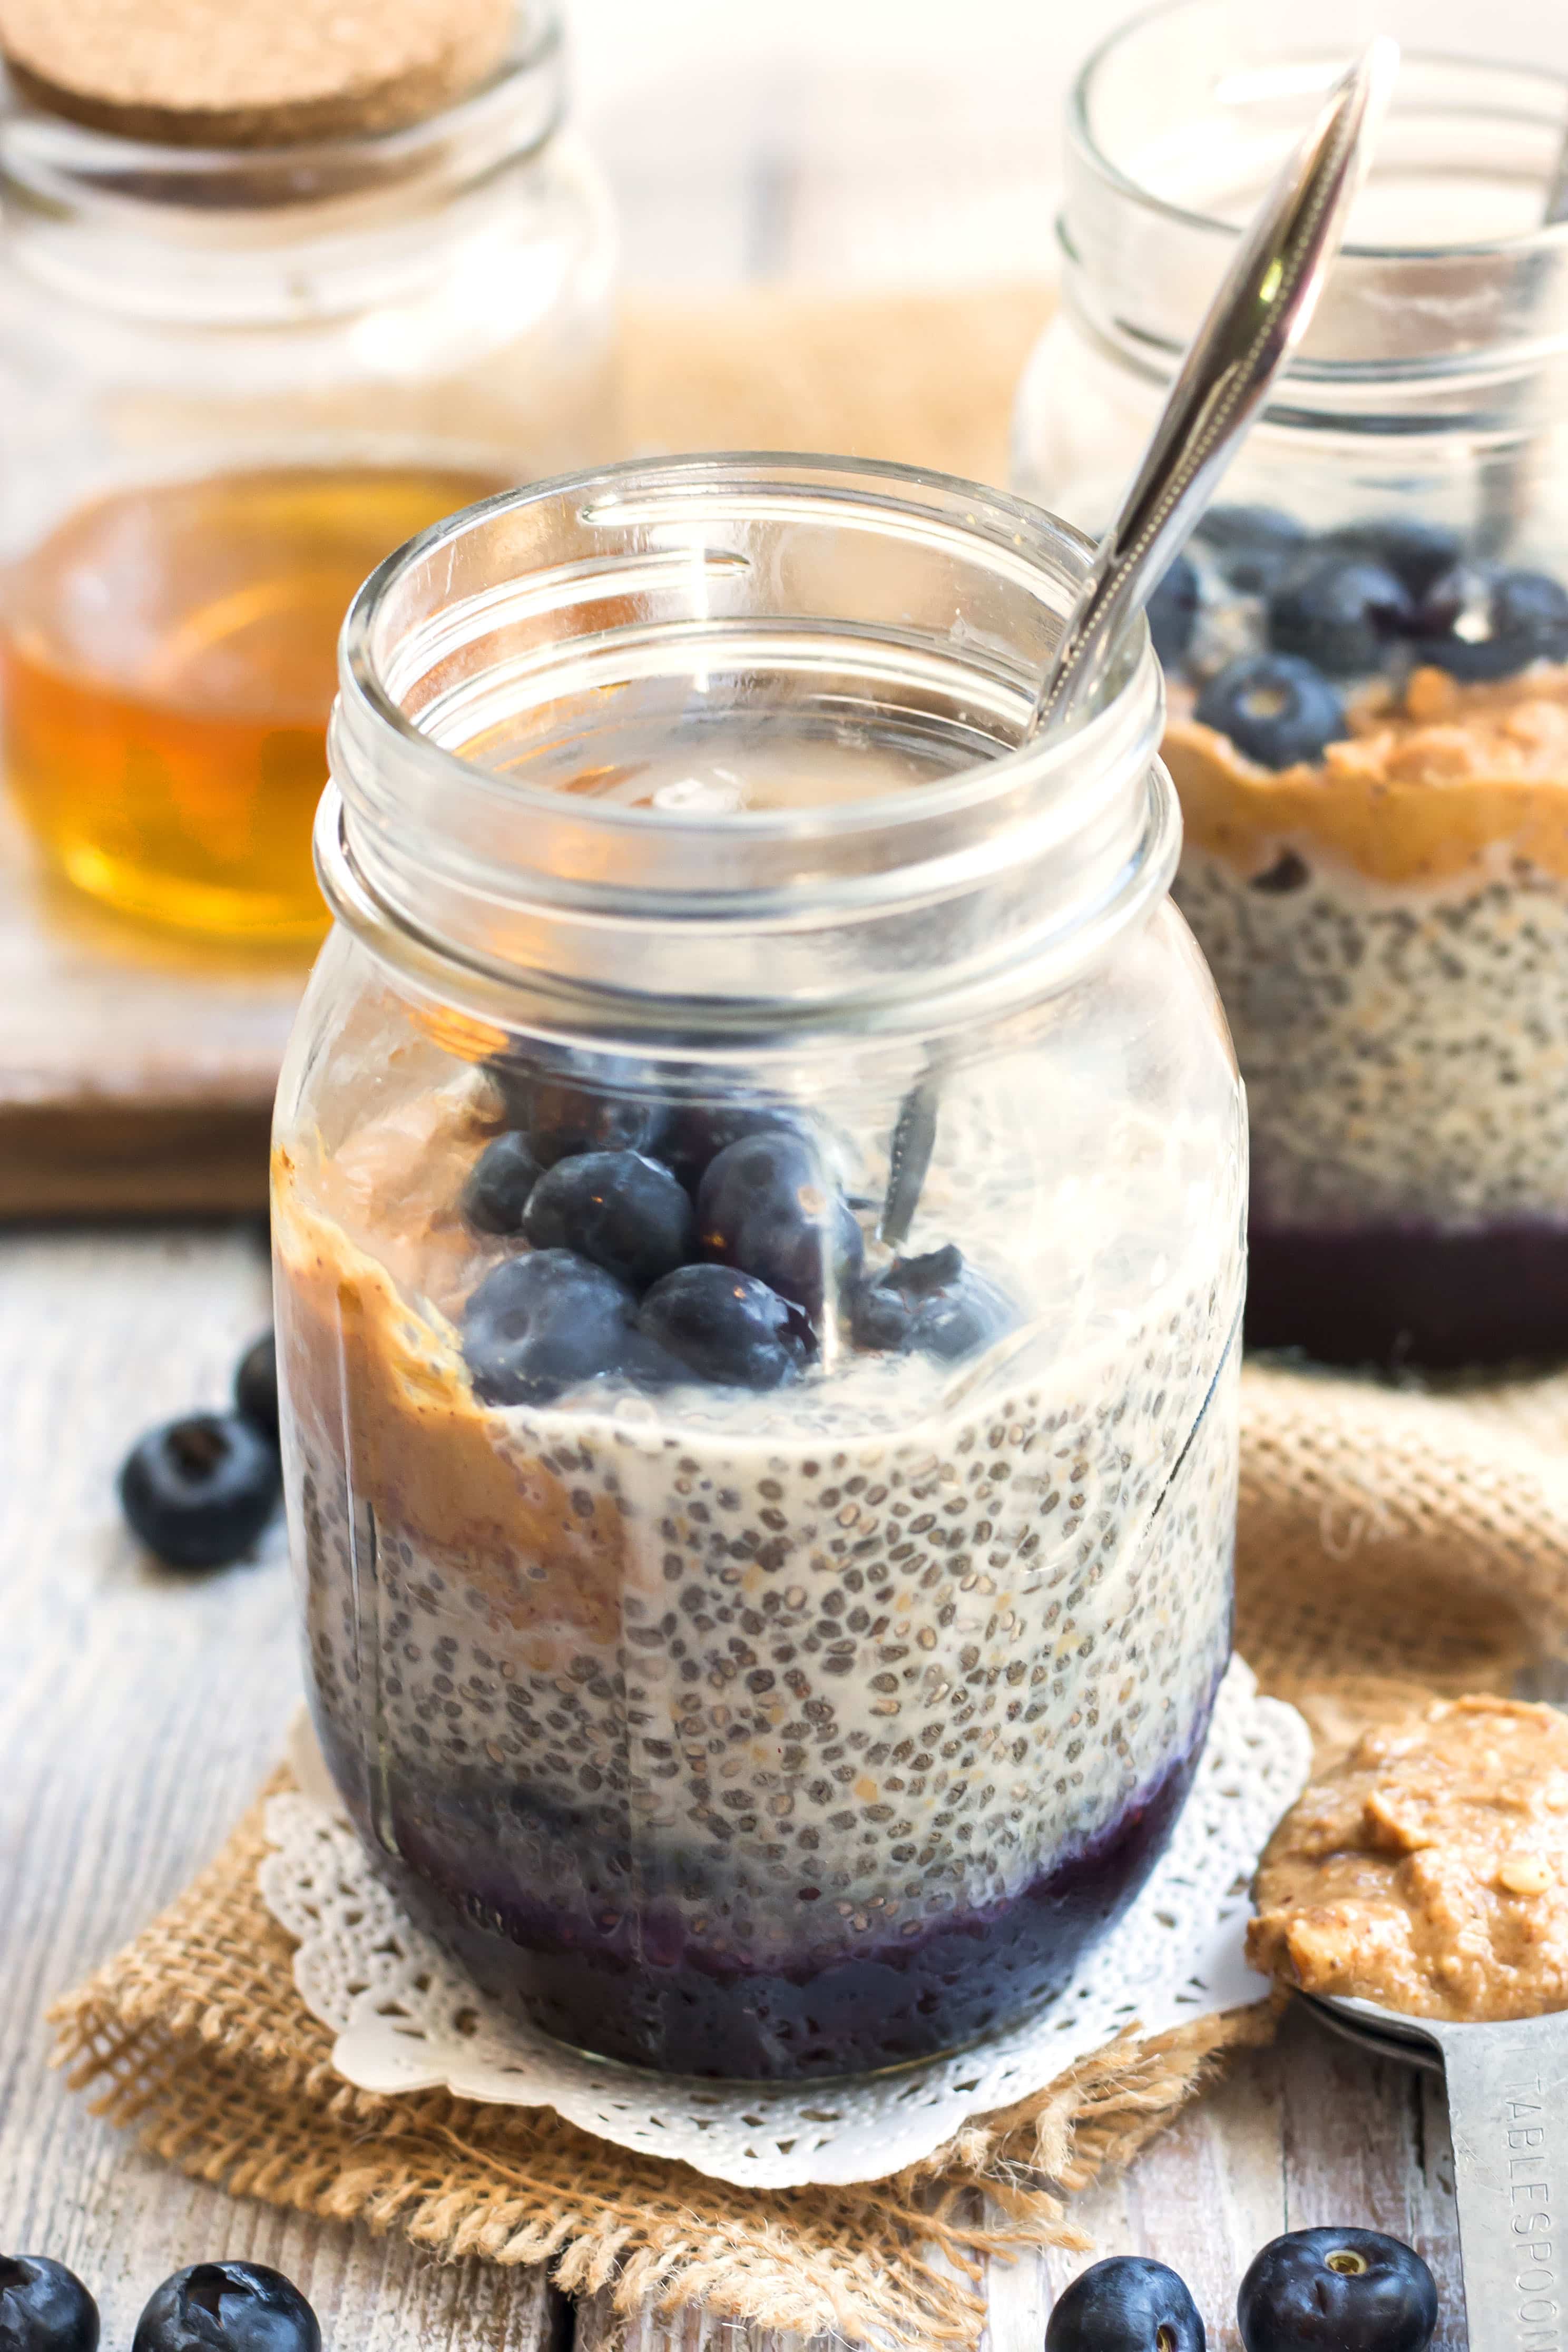 A chia seed pudding recipe inside a jar filled with peanut butter and blueberries for a healthy breakfast.